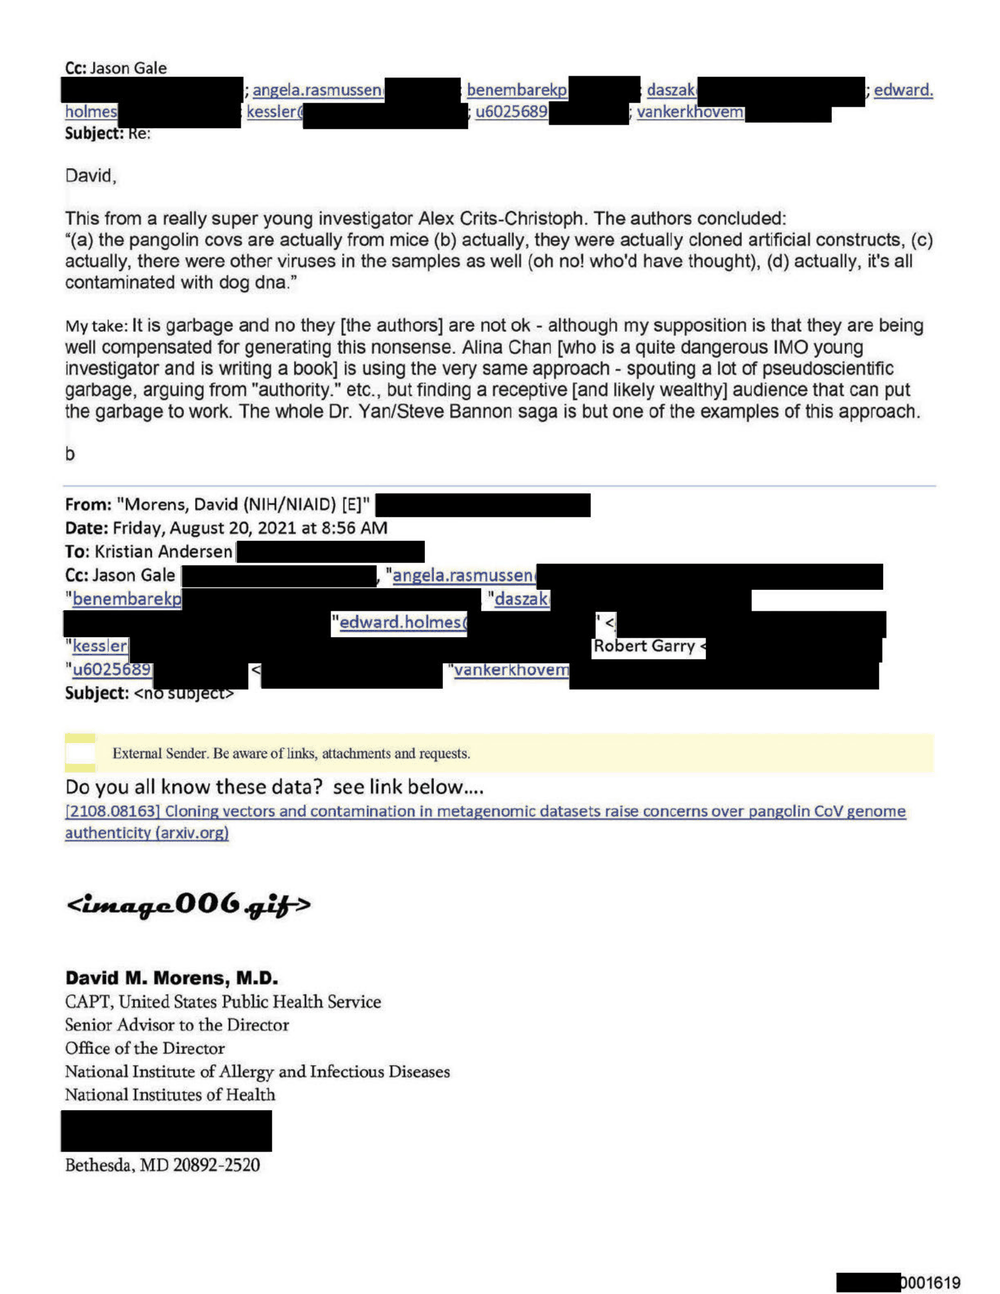 Page 37 from David Morens NIH Emails Redacted